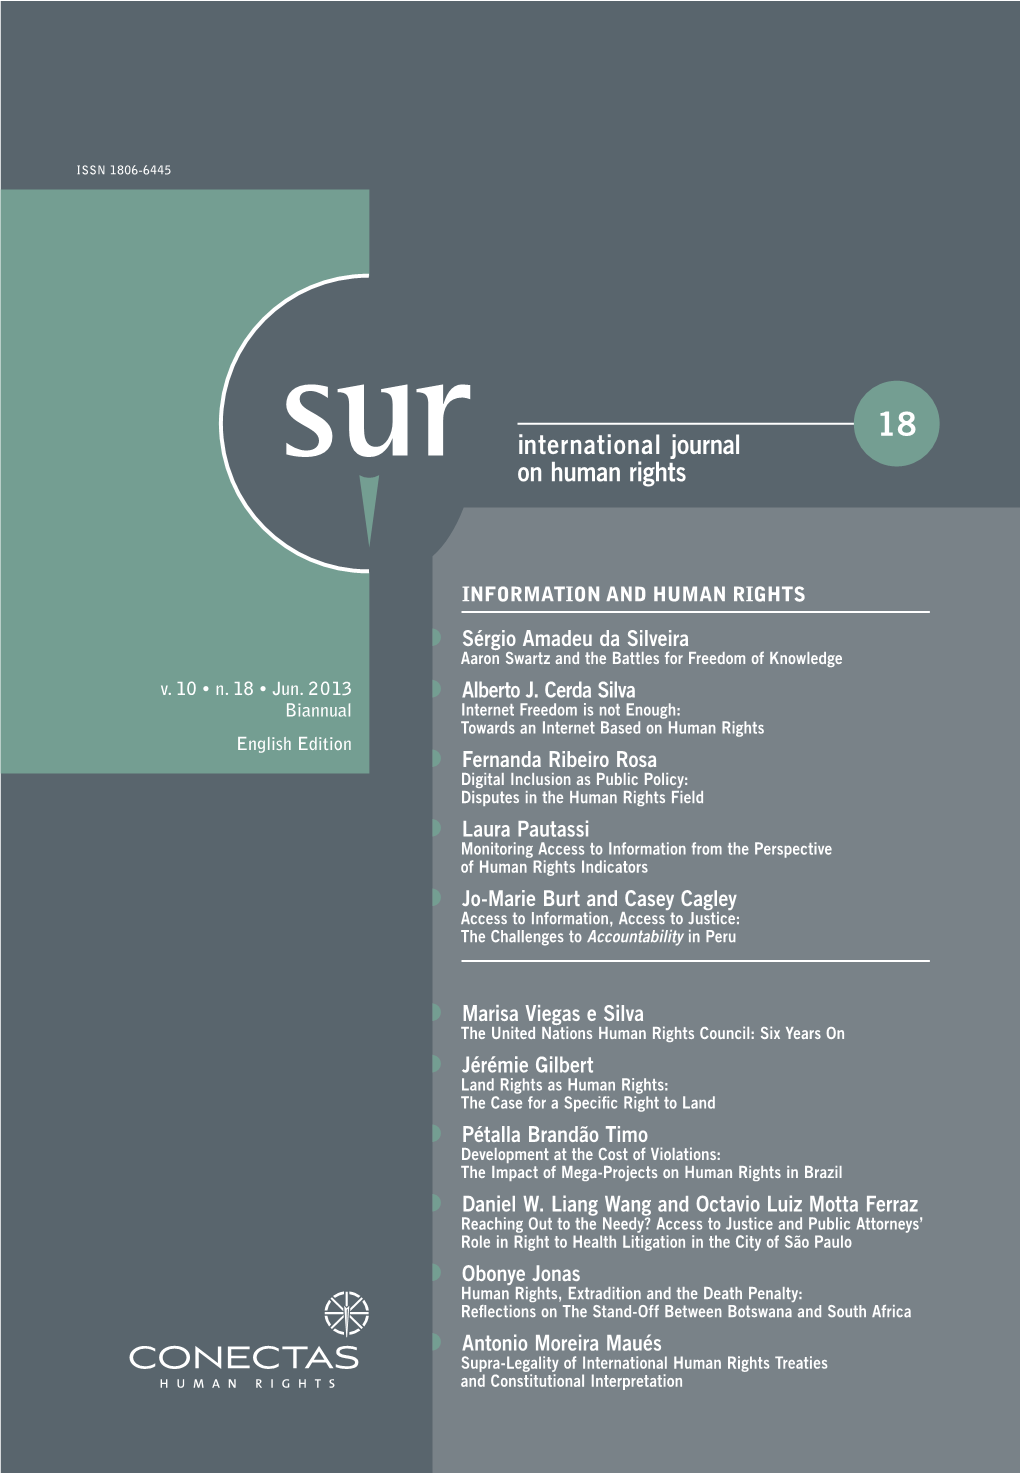 SUR - International Journal on Human Rights Is a Biannual Journal Published in English, Portuguese and Spanish by Conectas Human Rights